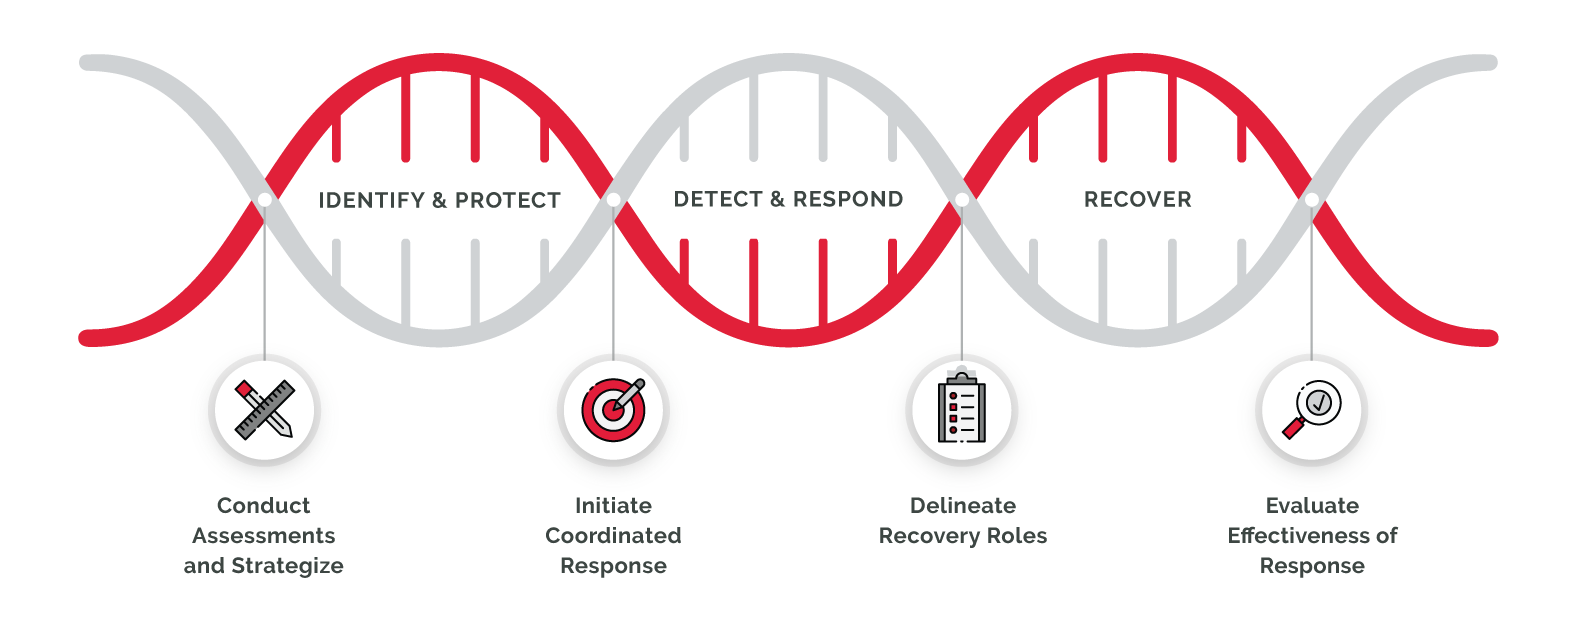 DNA strand showing the 3 steps of the Cyber Nexus Approach. These steps include Identify and Protect, Detect and Respond, and Recover. The sub-steps include Conduct Assessments and Strategize, Initiate Coordinated Response, Delineate Recovery Roles, and Evaluate Effectiveness of Response. 